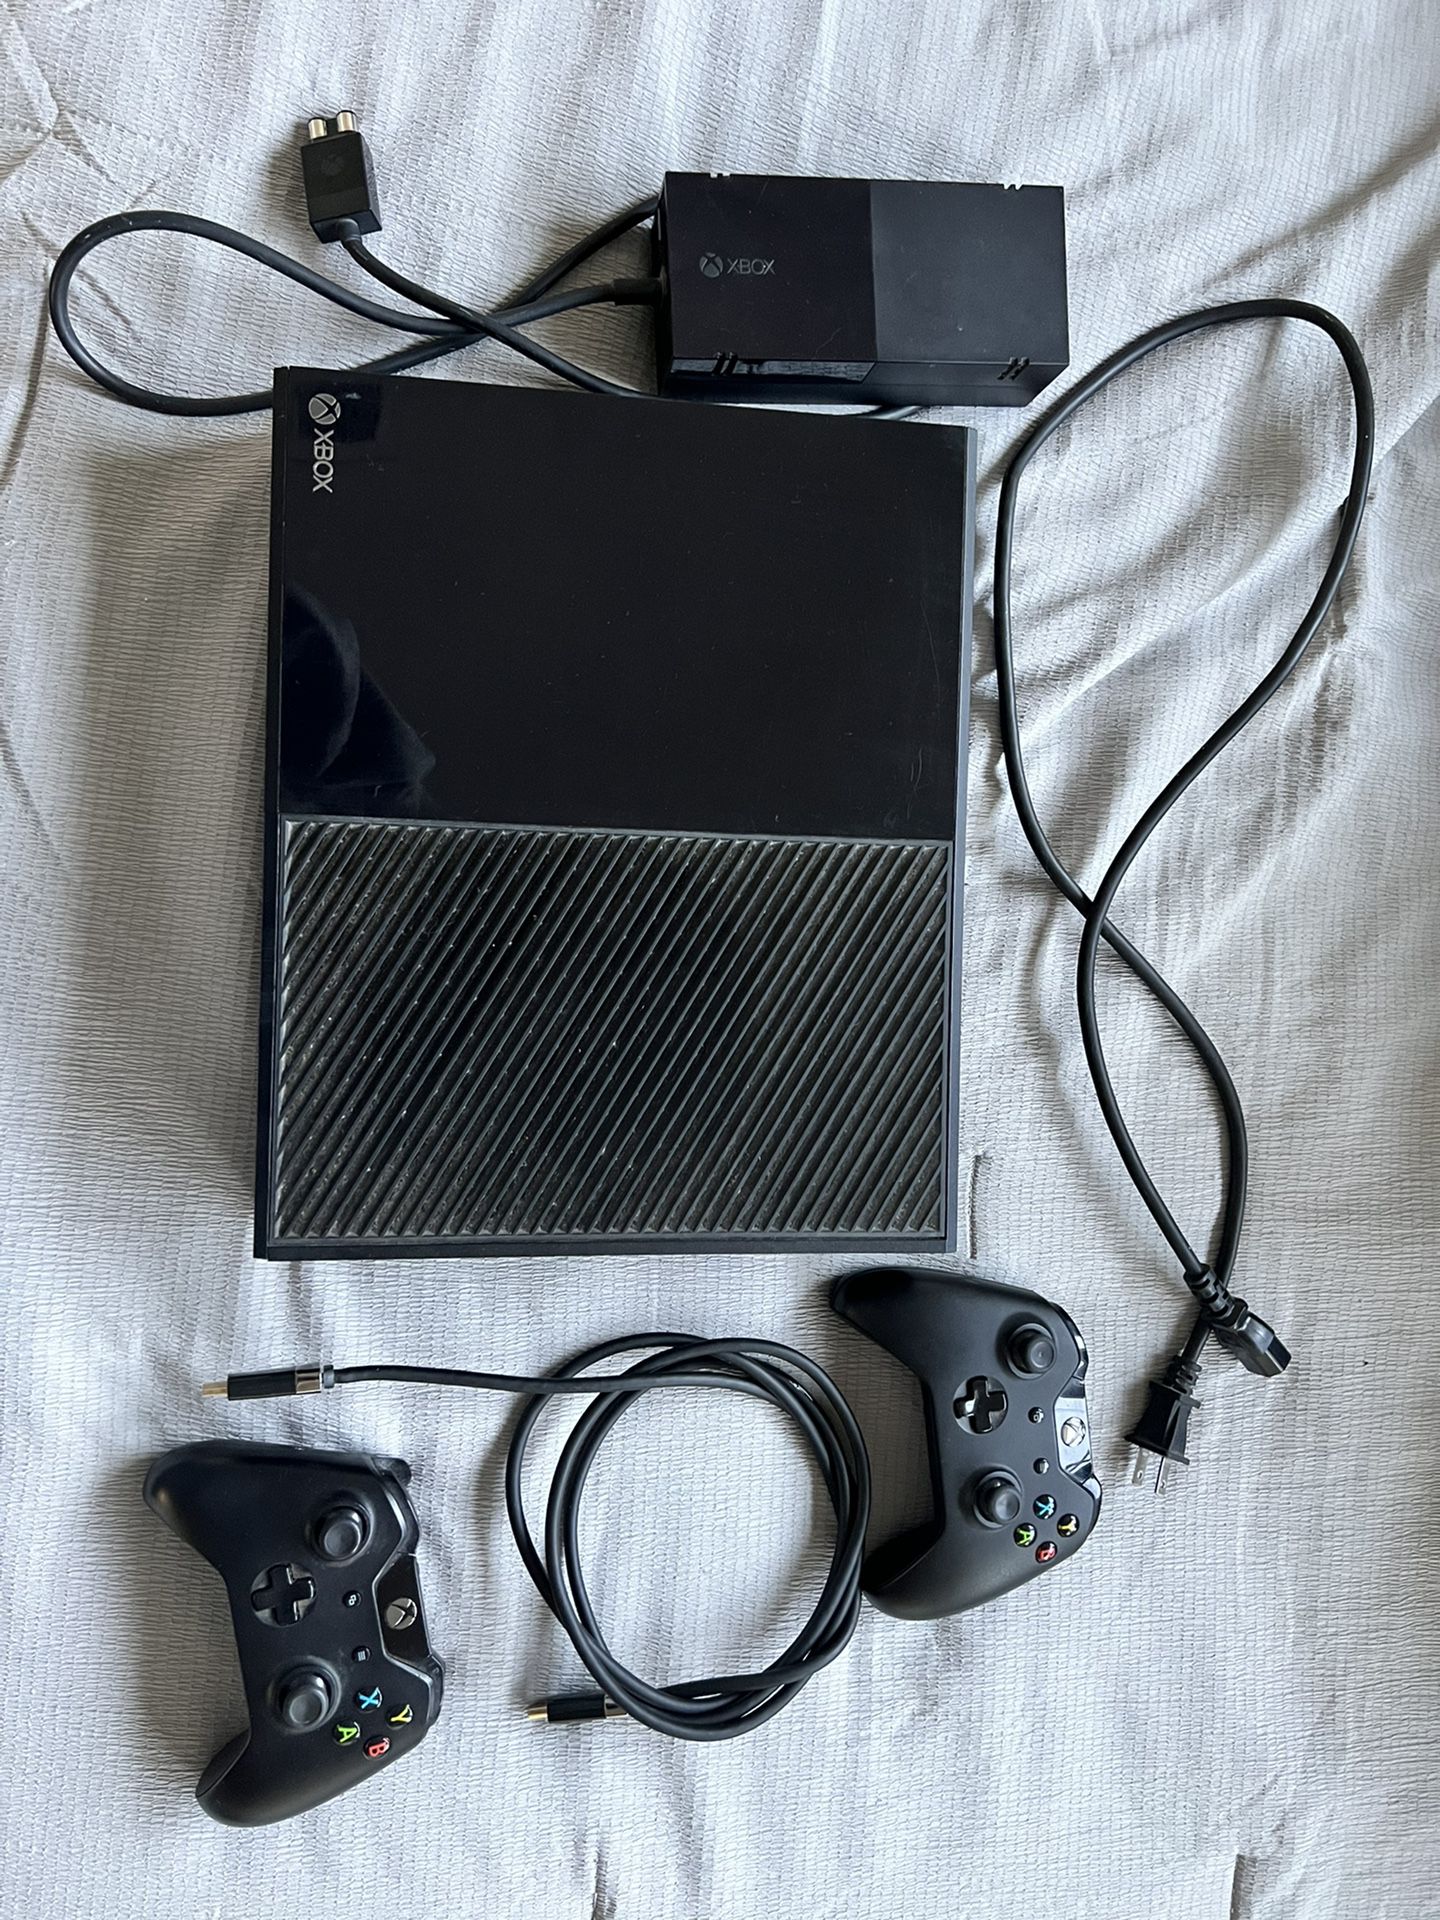 Xbox one with headset and games